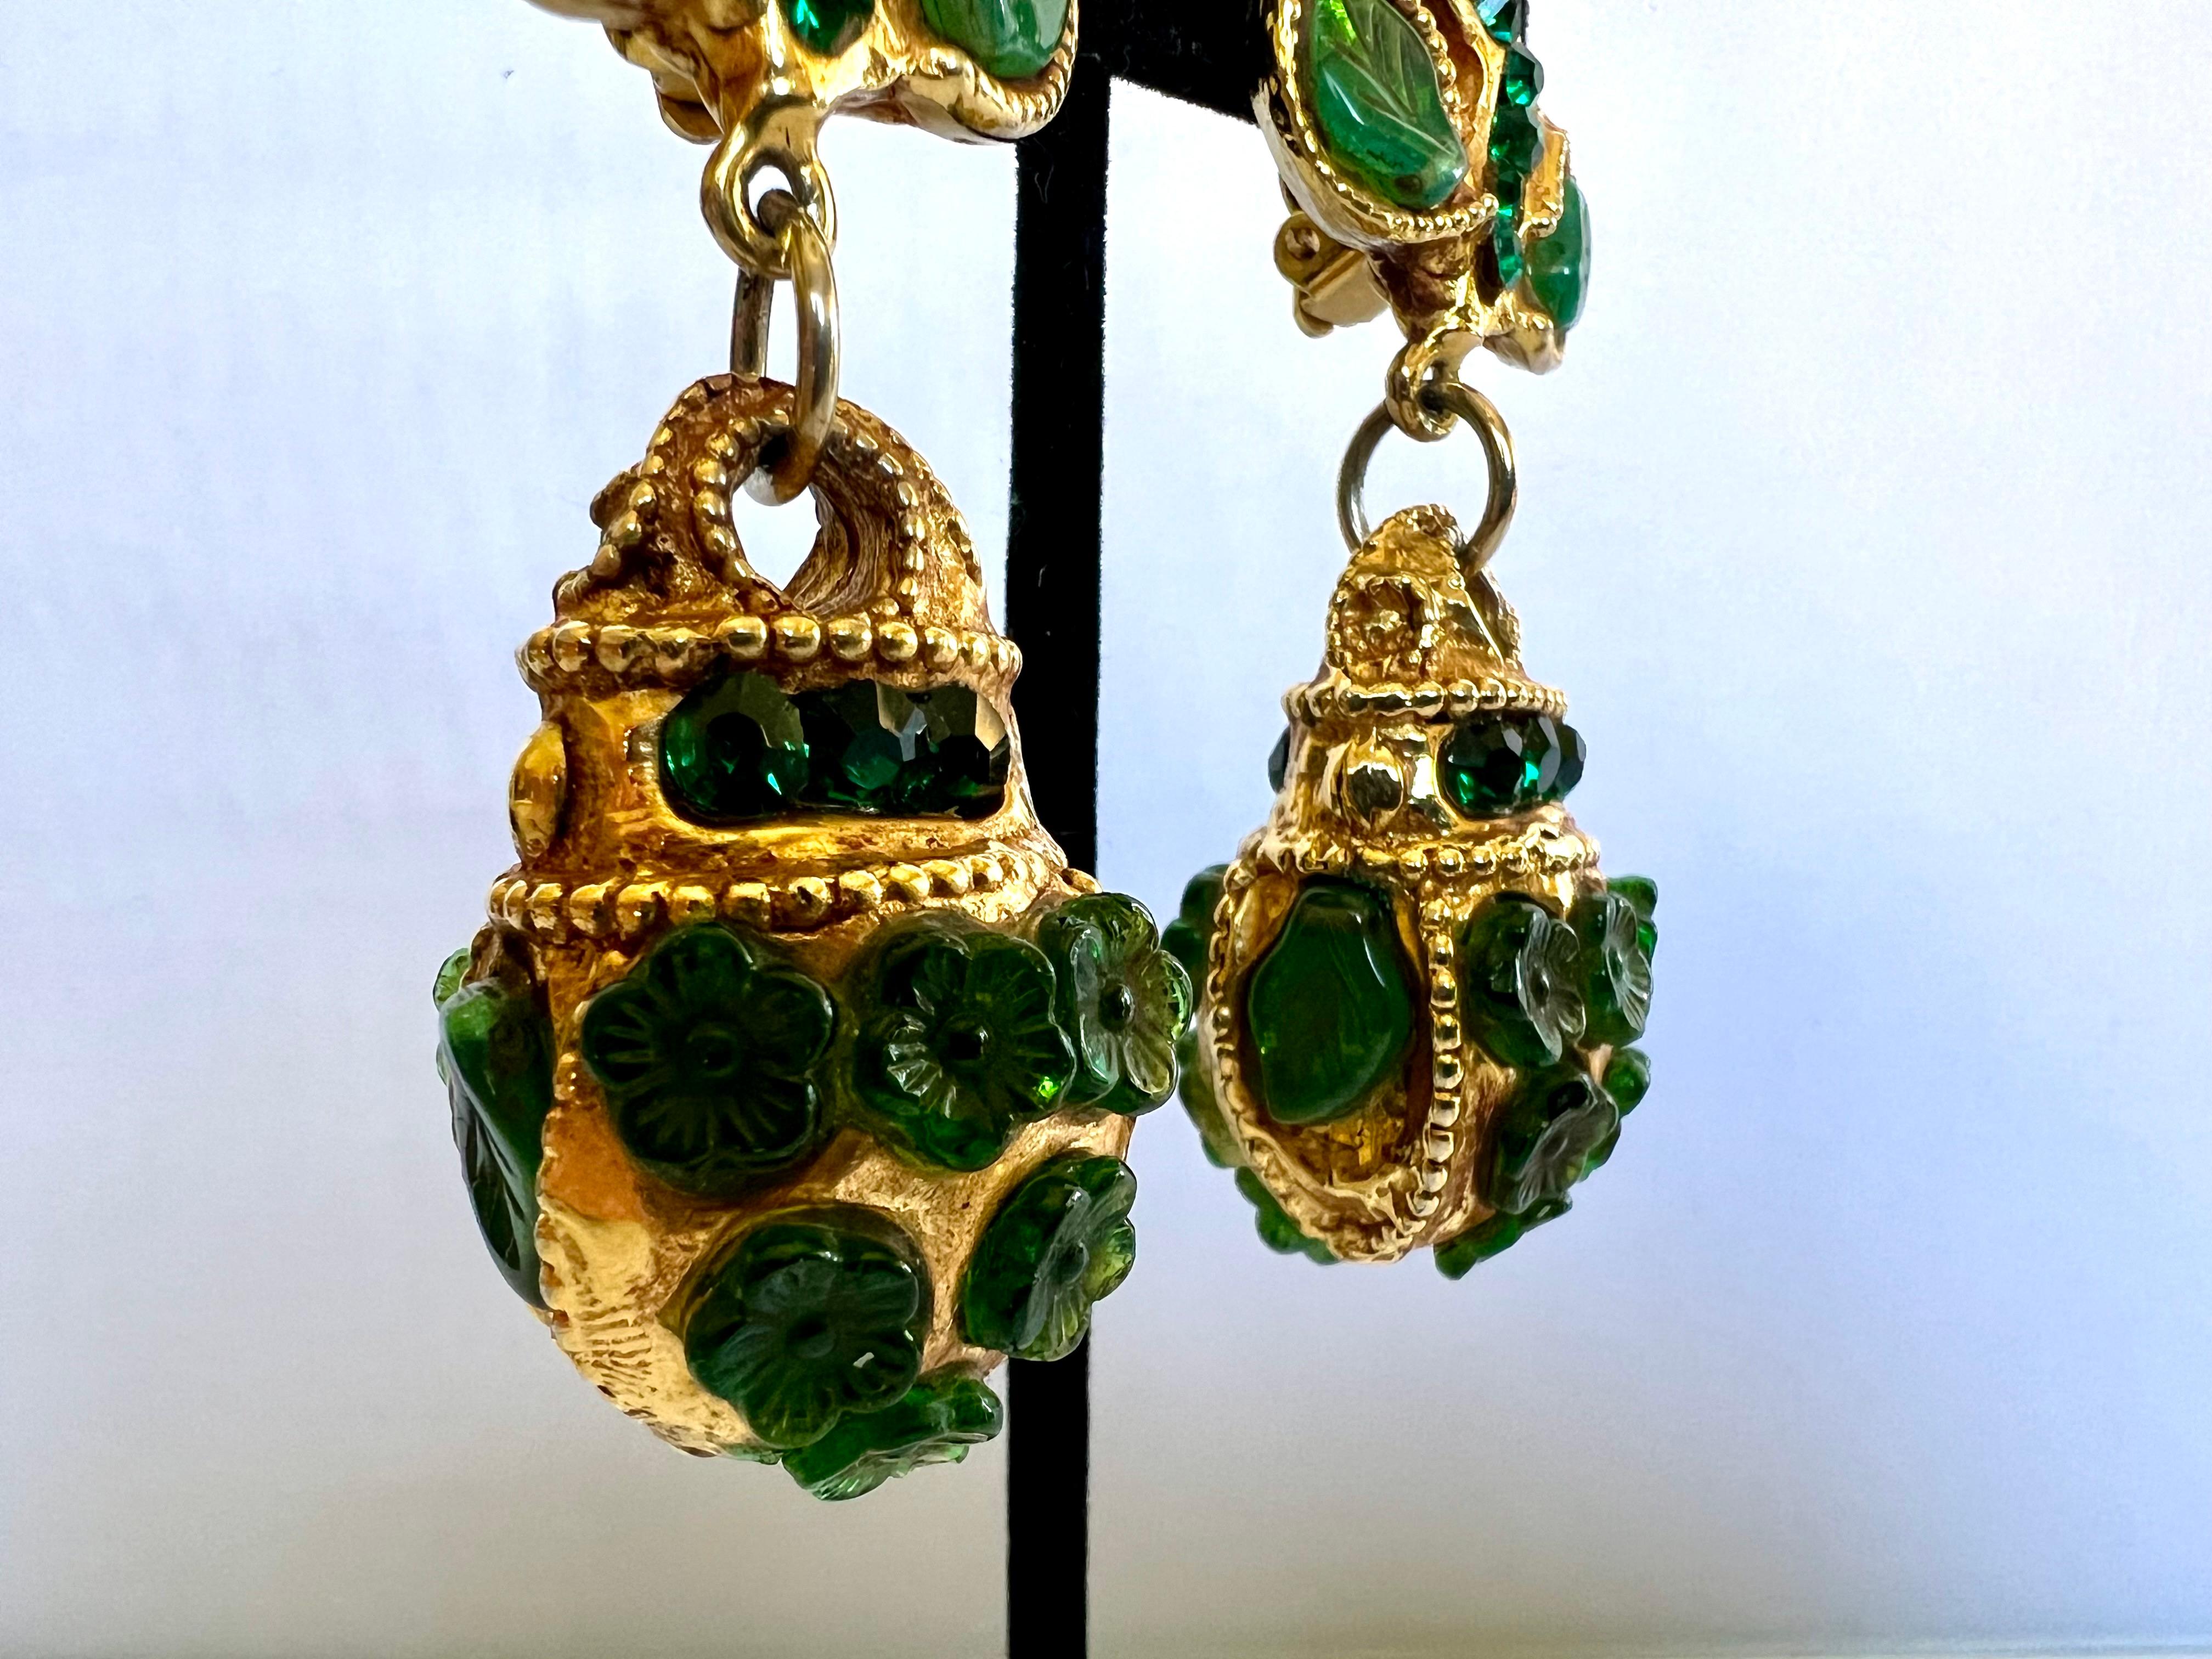 Vintage baroque style clip-on statement earrings with faux emerald and green rhinestone details by Kalinger Paris.